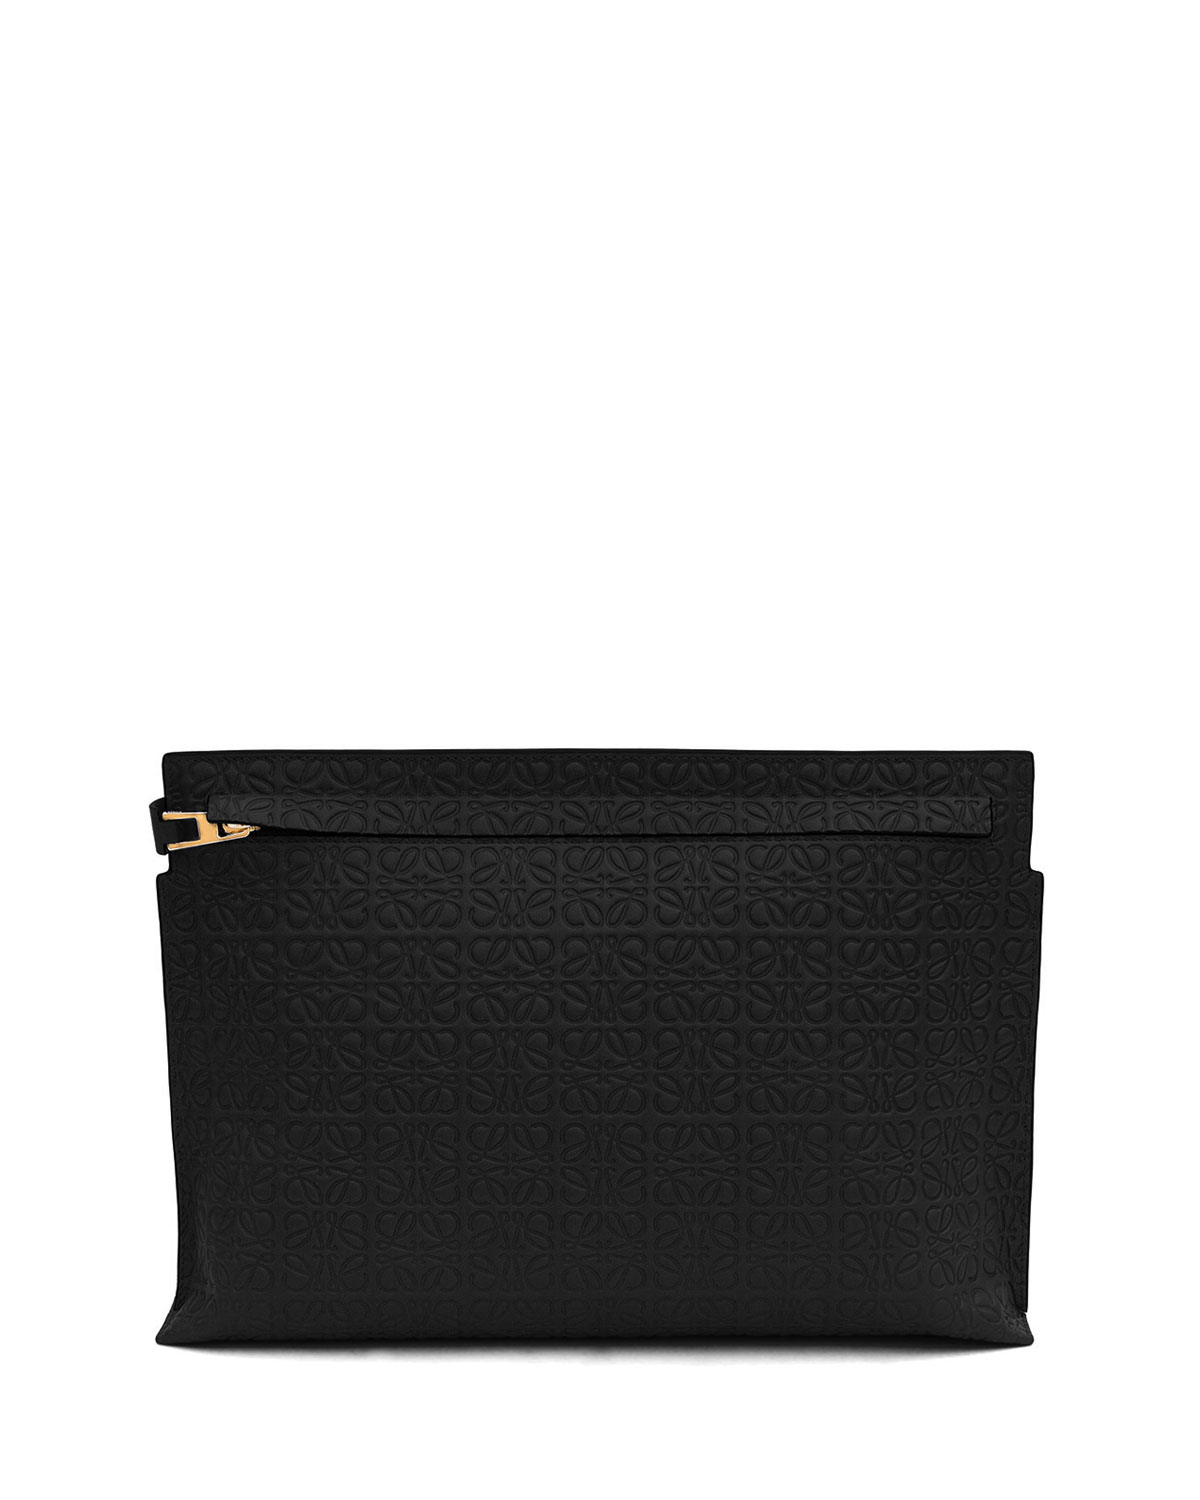 Loewe Leather T Pouch Clutch Bag in Black - Lyst